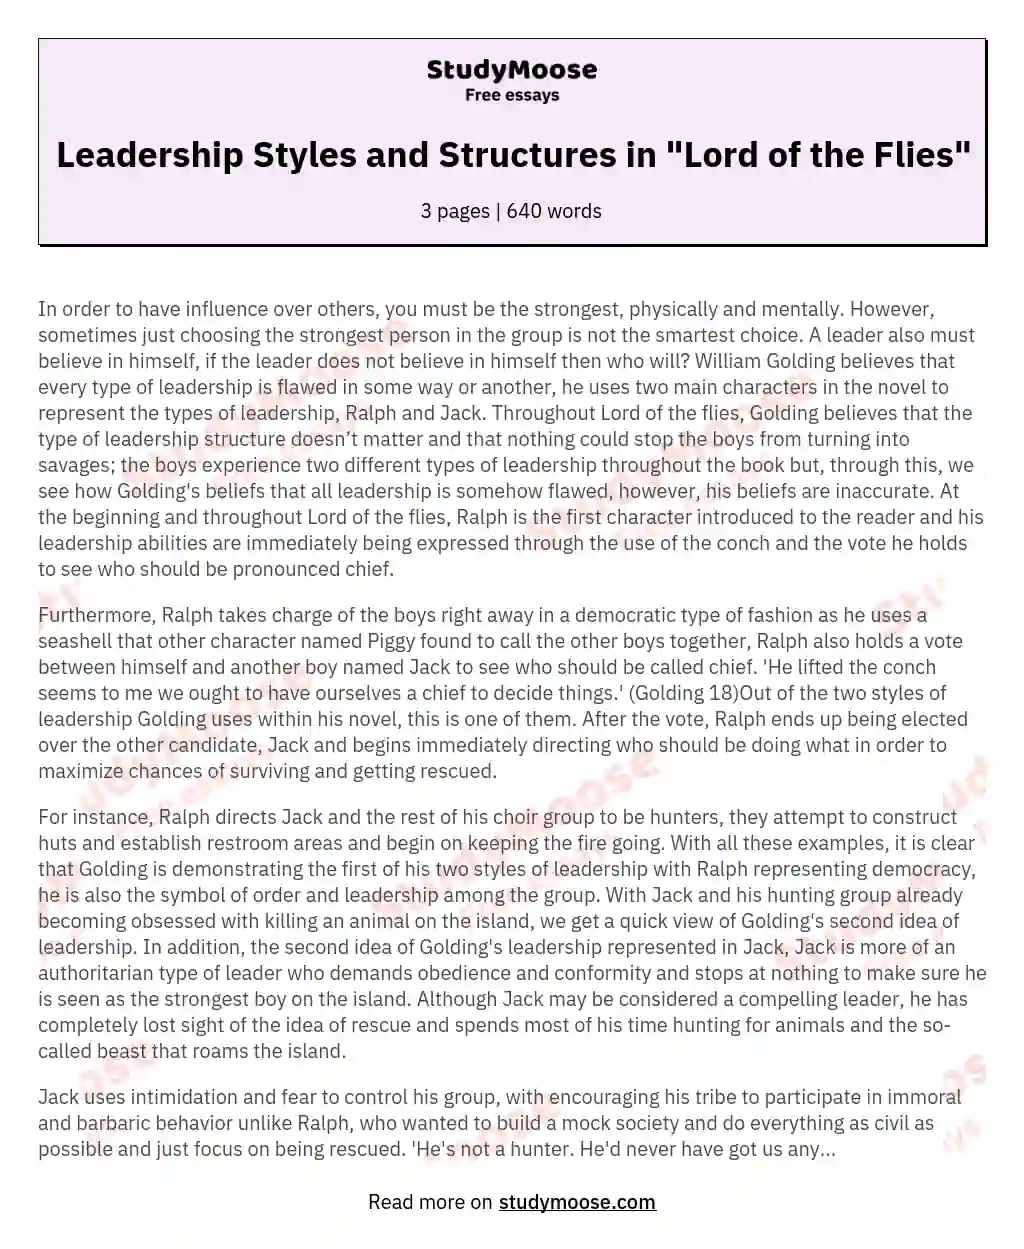 Leadership Styles and Structures in "Lord of the Flies" essay